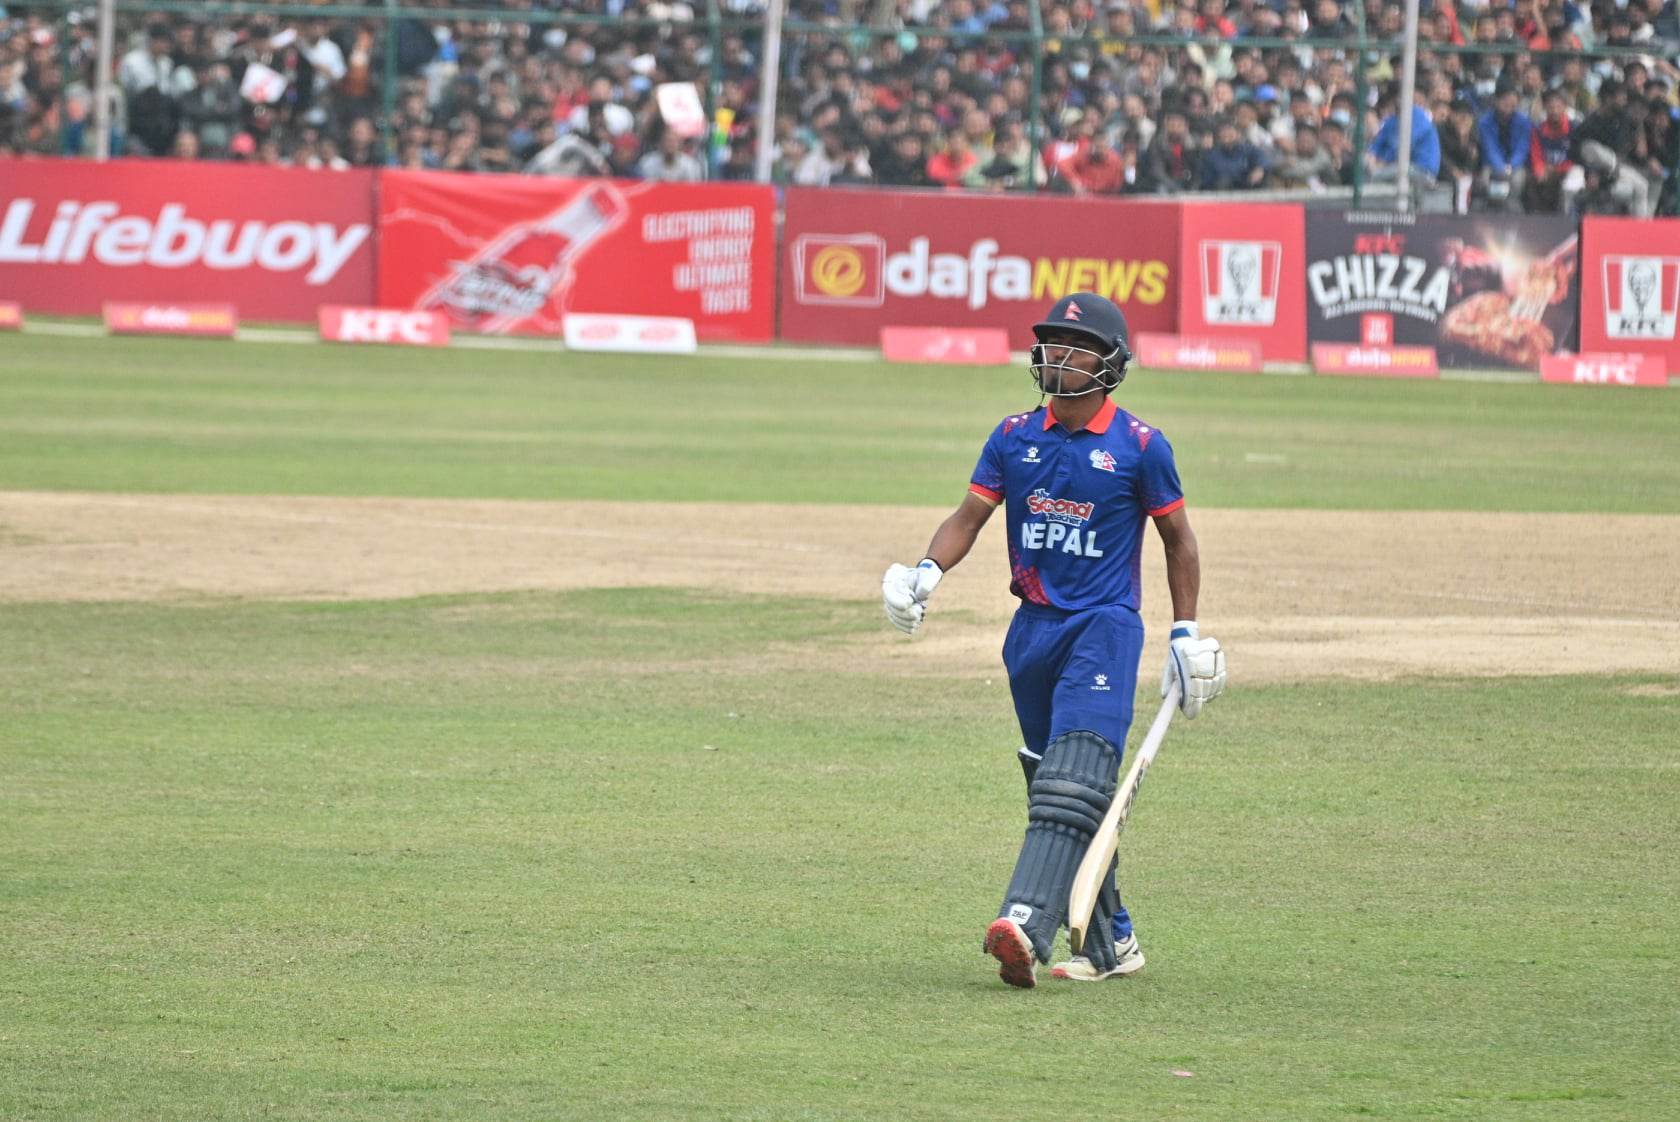 Rohit Paudel out for 42 runs against Namibia